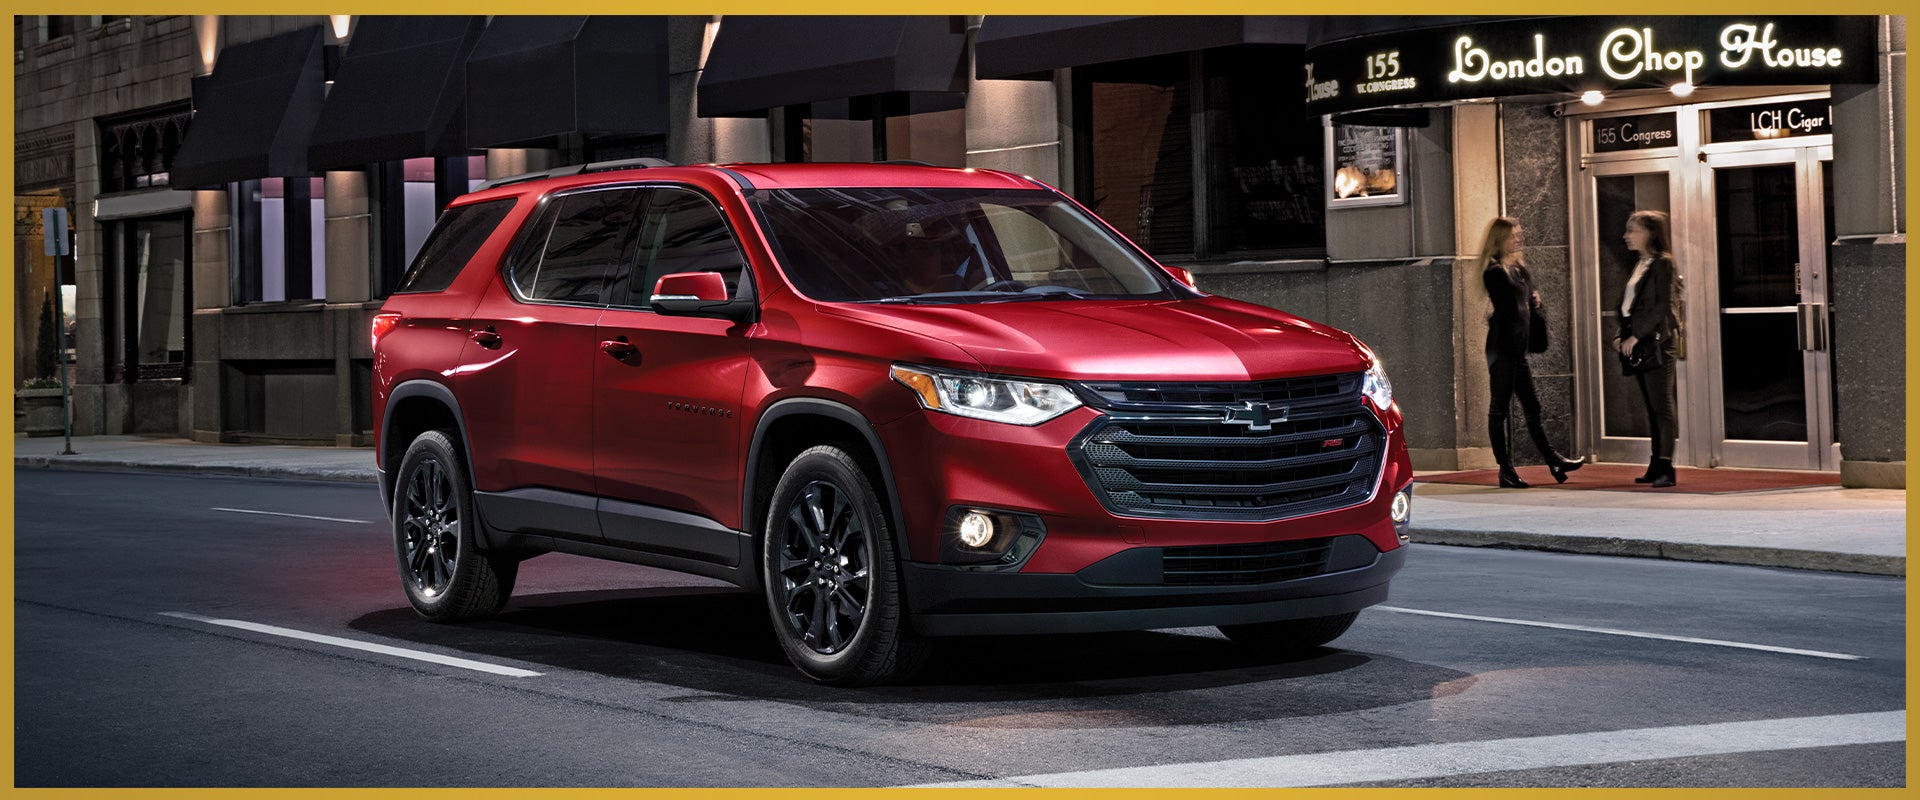 Used Chevy Traverse For Sale in Aberdeen MD